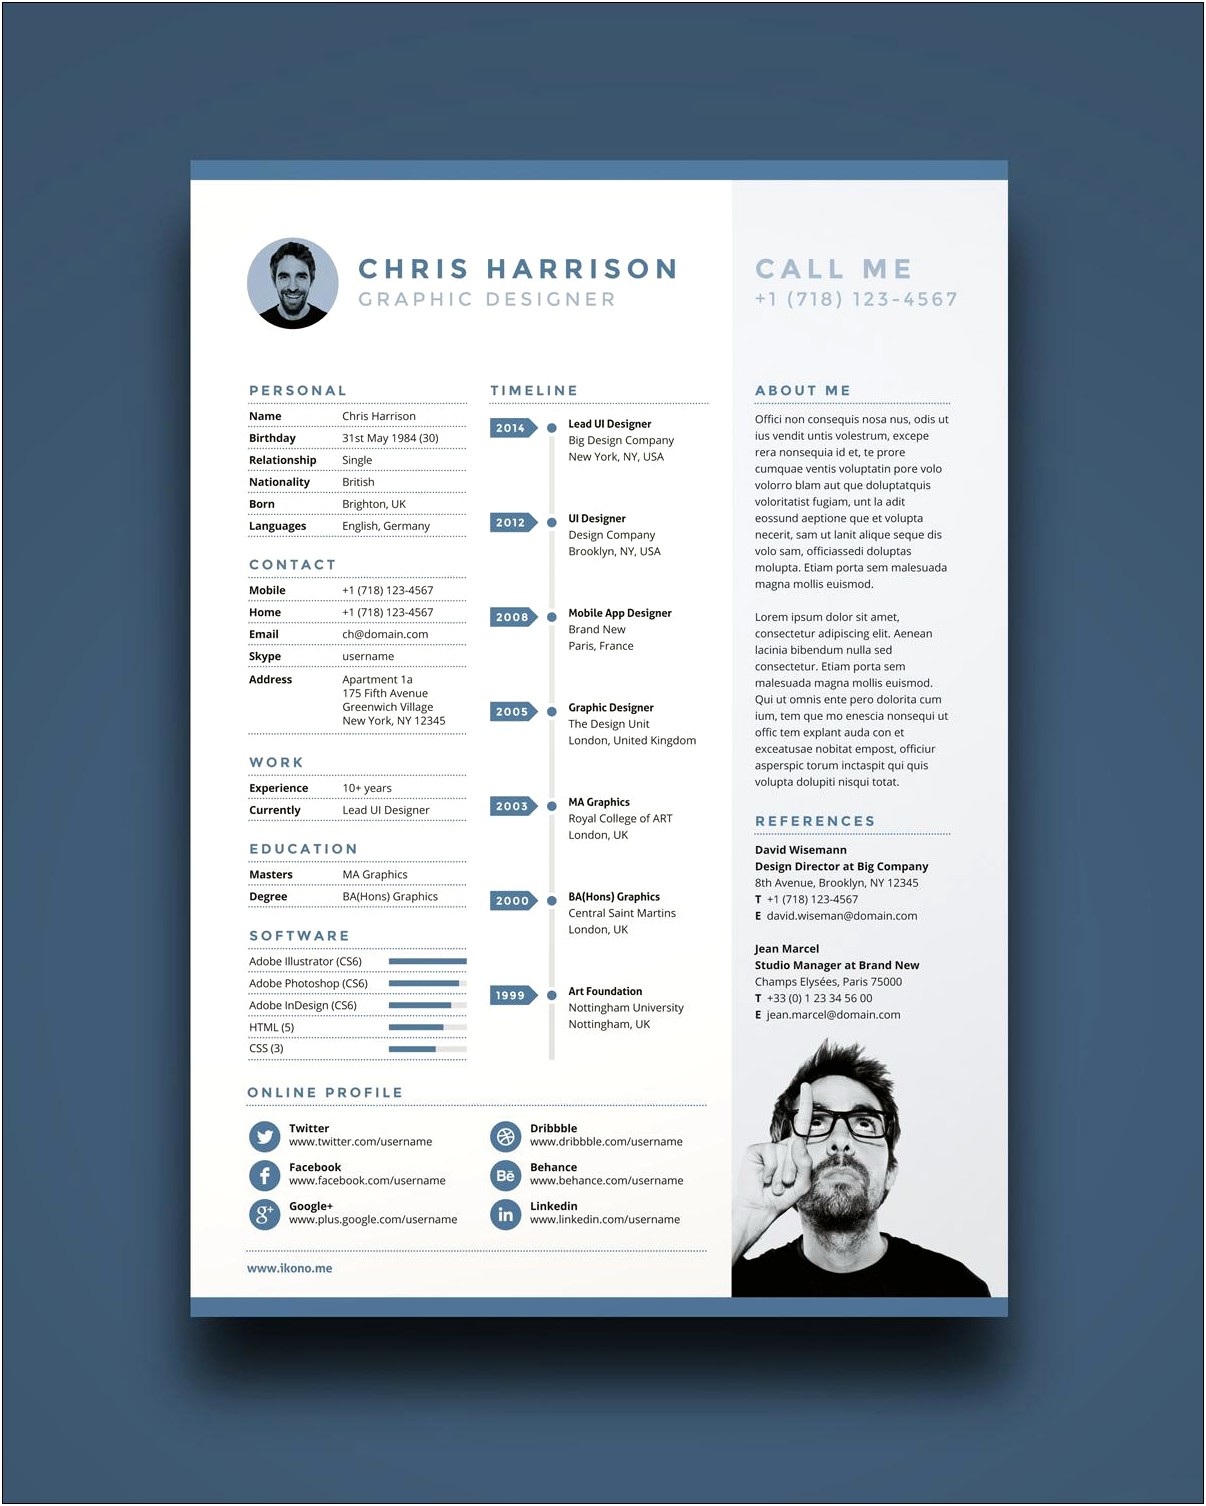 Free Resume Template For Experienced Professional